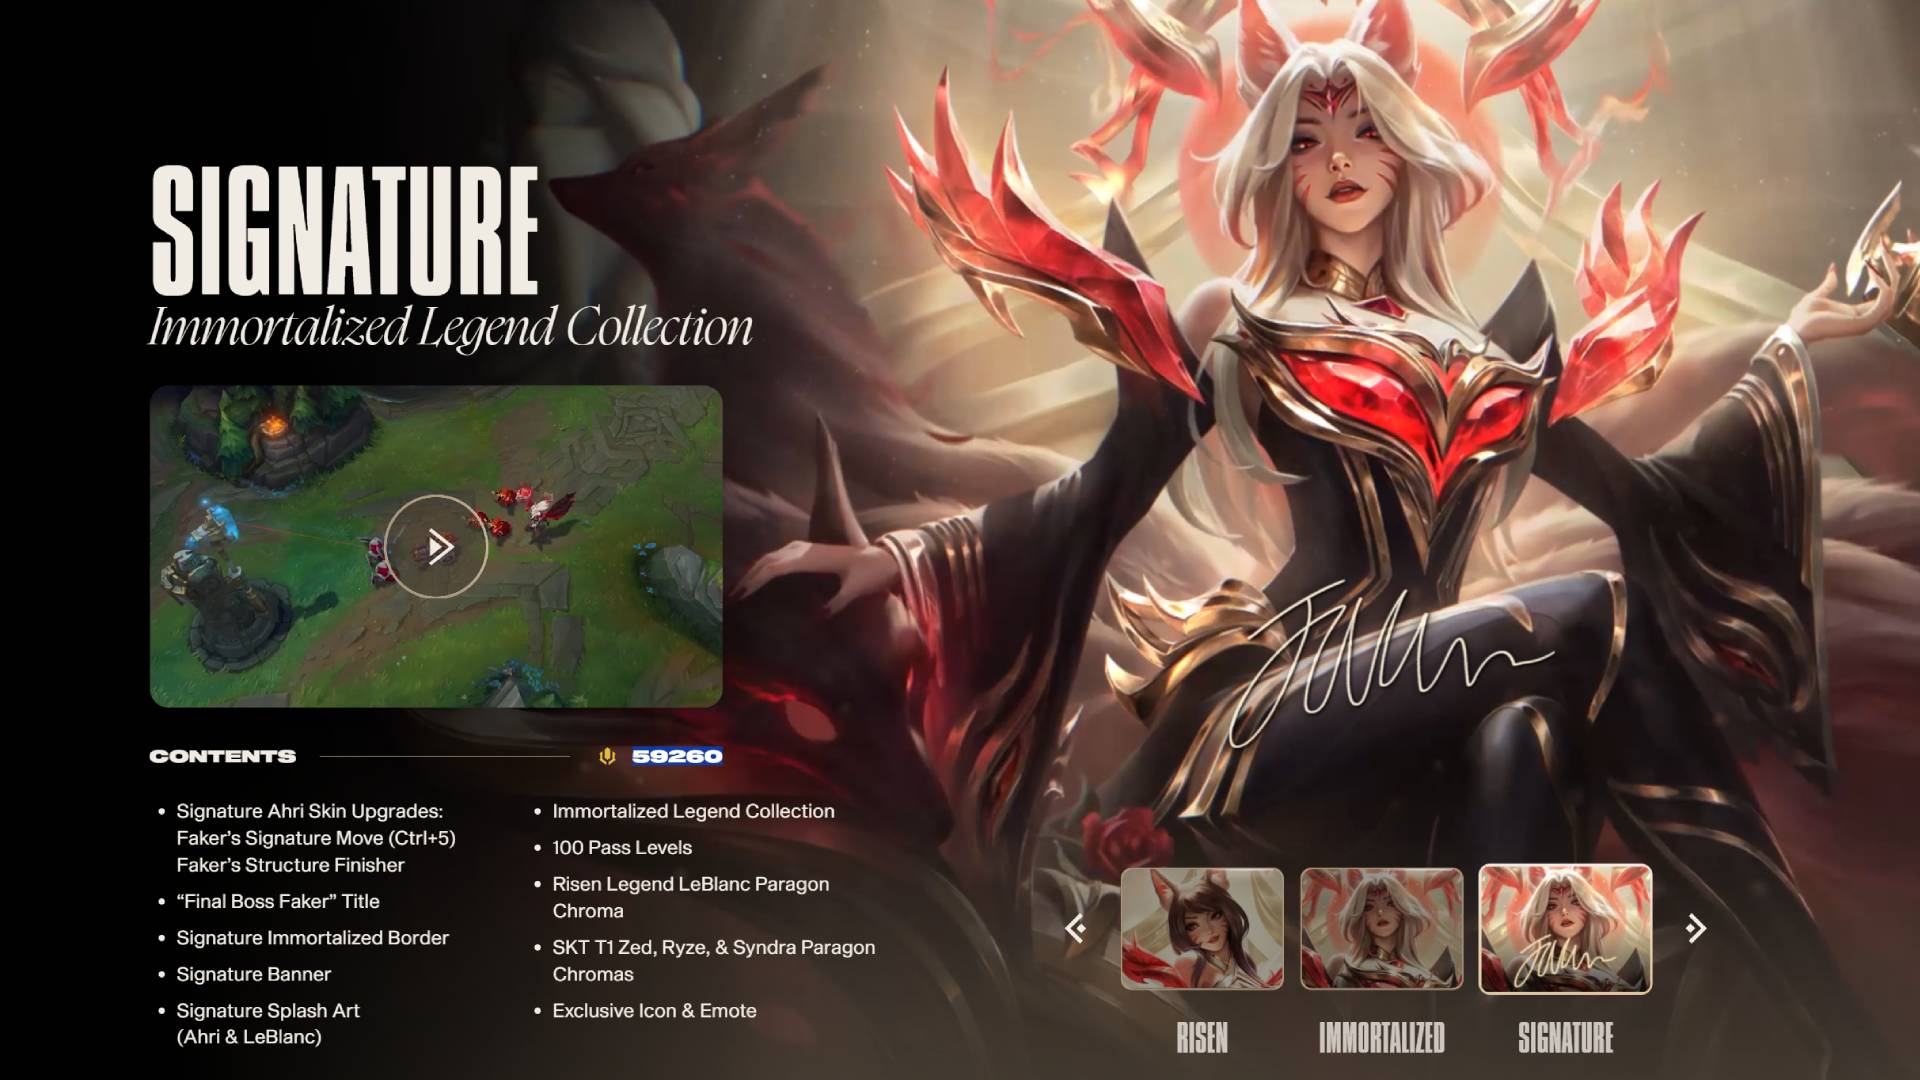 An image showing the League of Legends Immortalized legend bundle, which includes the Faker ahri skin